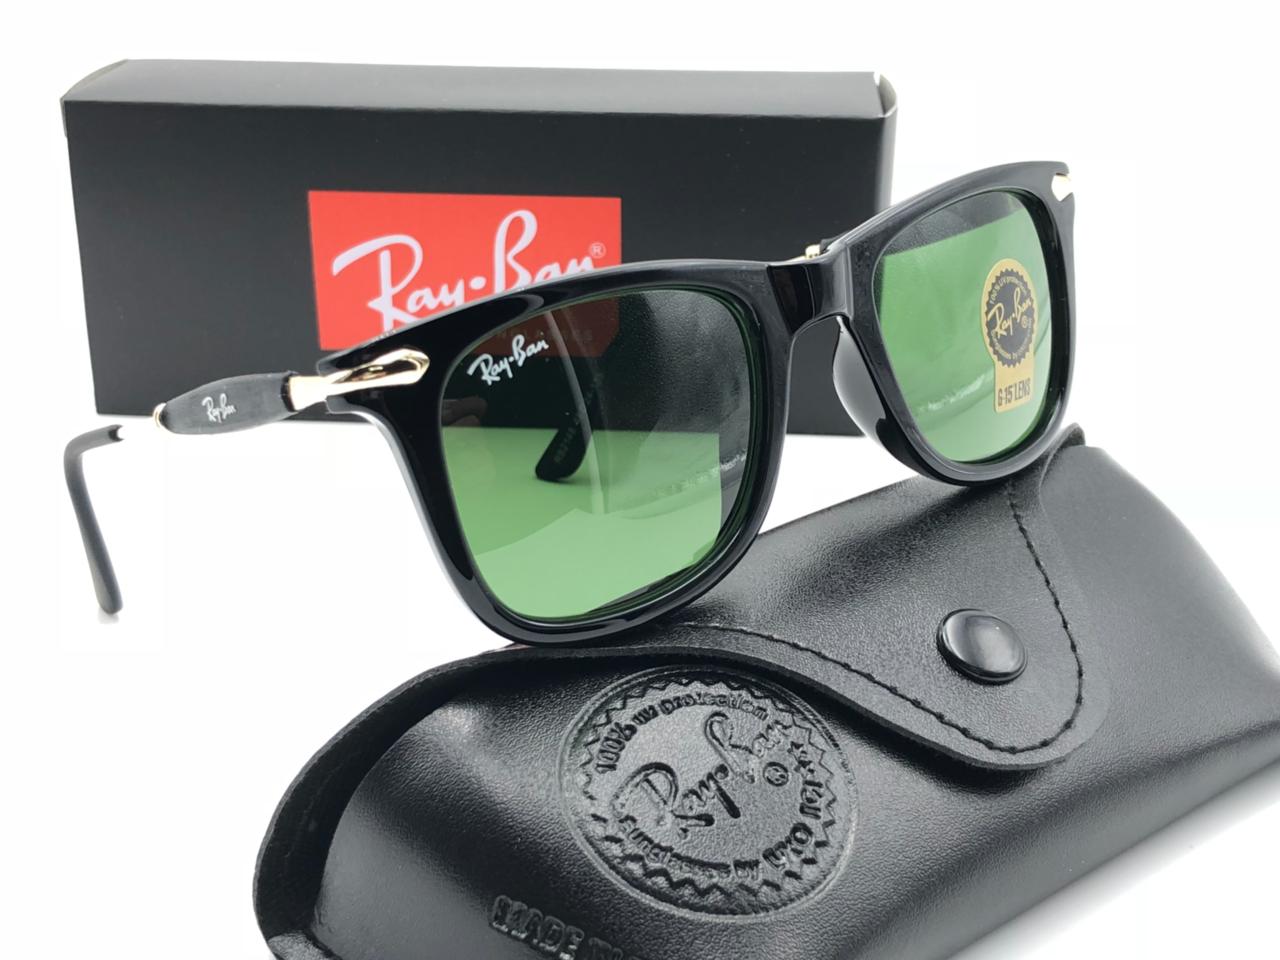 First Copy Ray Ban Sunglasses India Rs599 Only Wayfarer Rb2148 New Arrivals Price 9